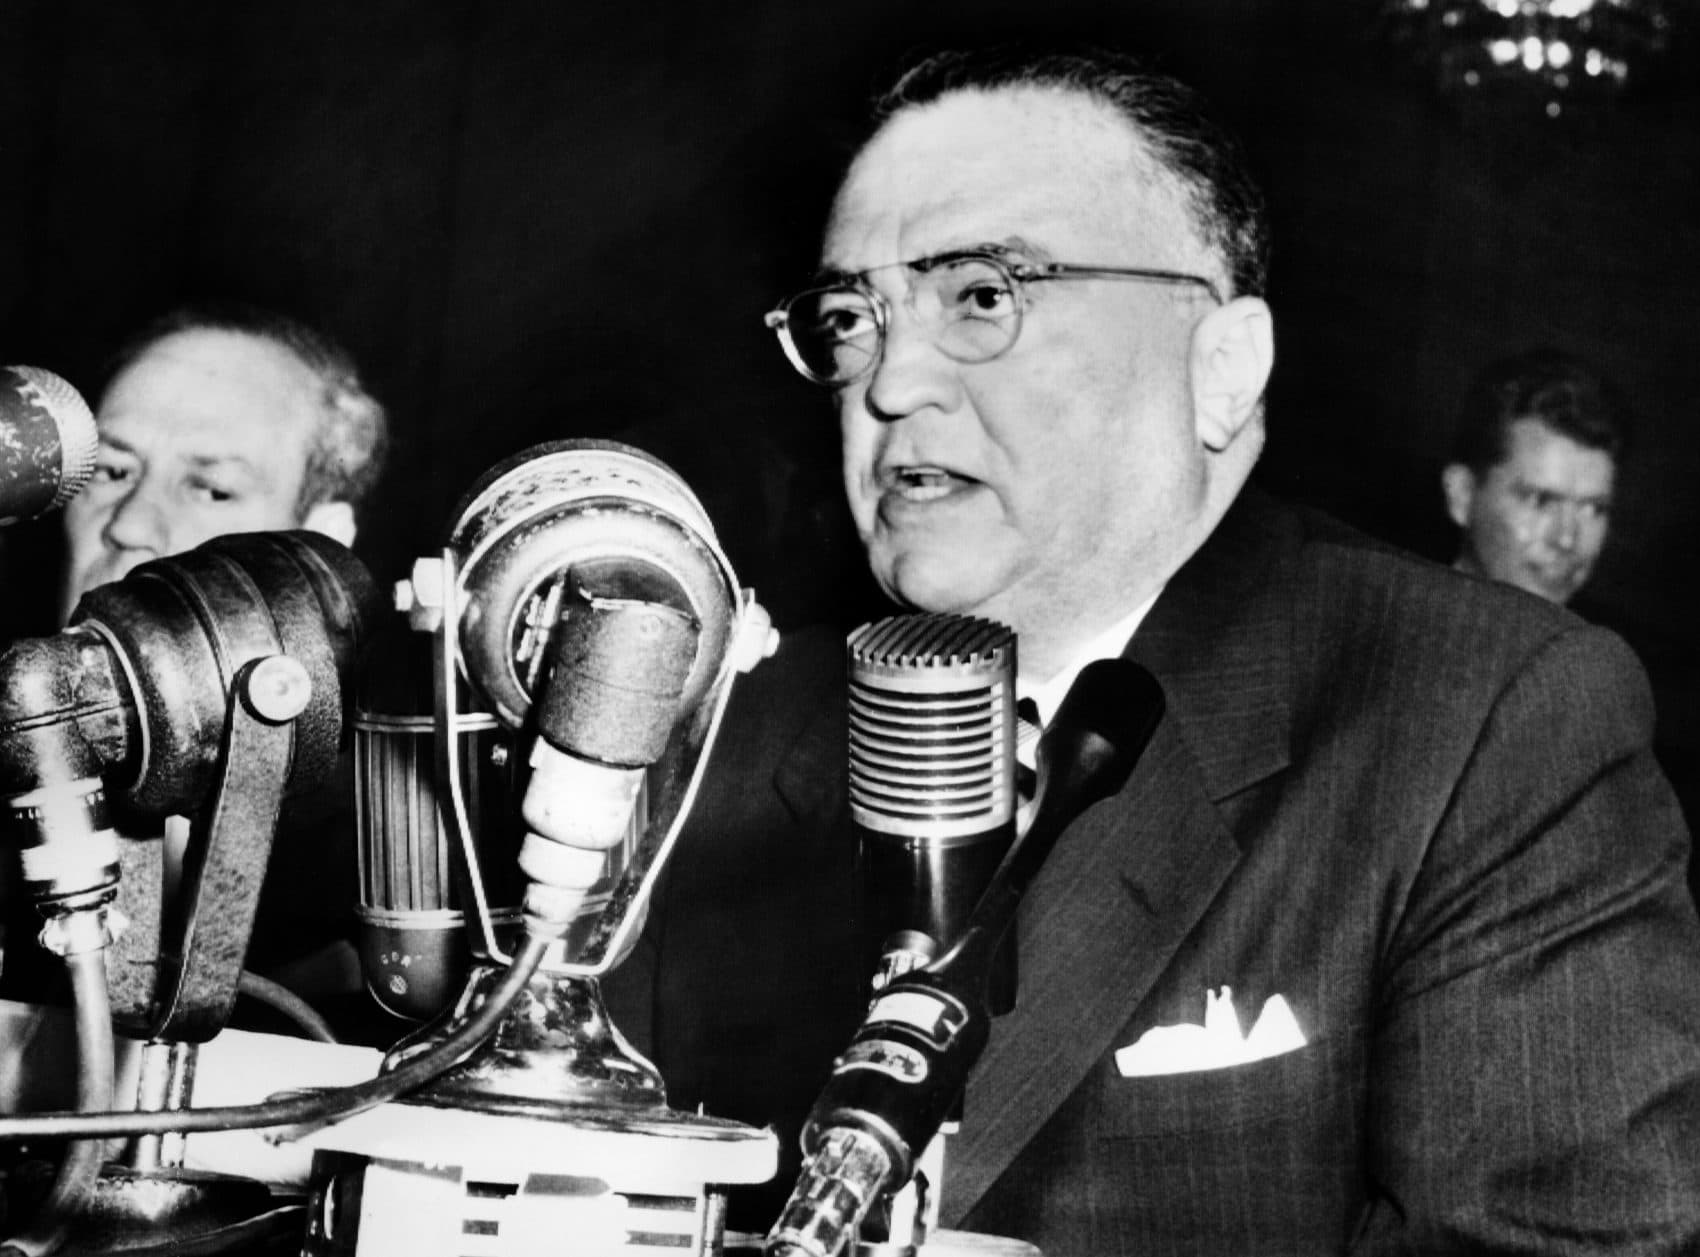 J. Edgar Hoover, director of the Federal Bureau of Investigation, gives a speech during testimony before a Senate committee in 1953 in Washington, D.C. (Bob Mulligan/AFP/Getty Images)